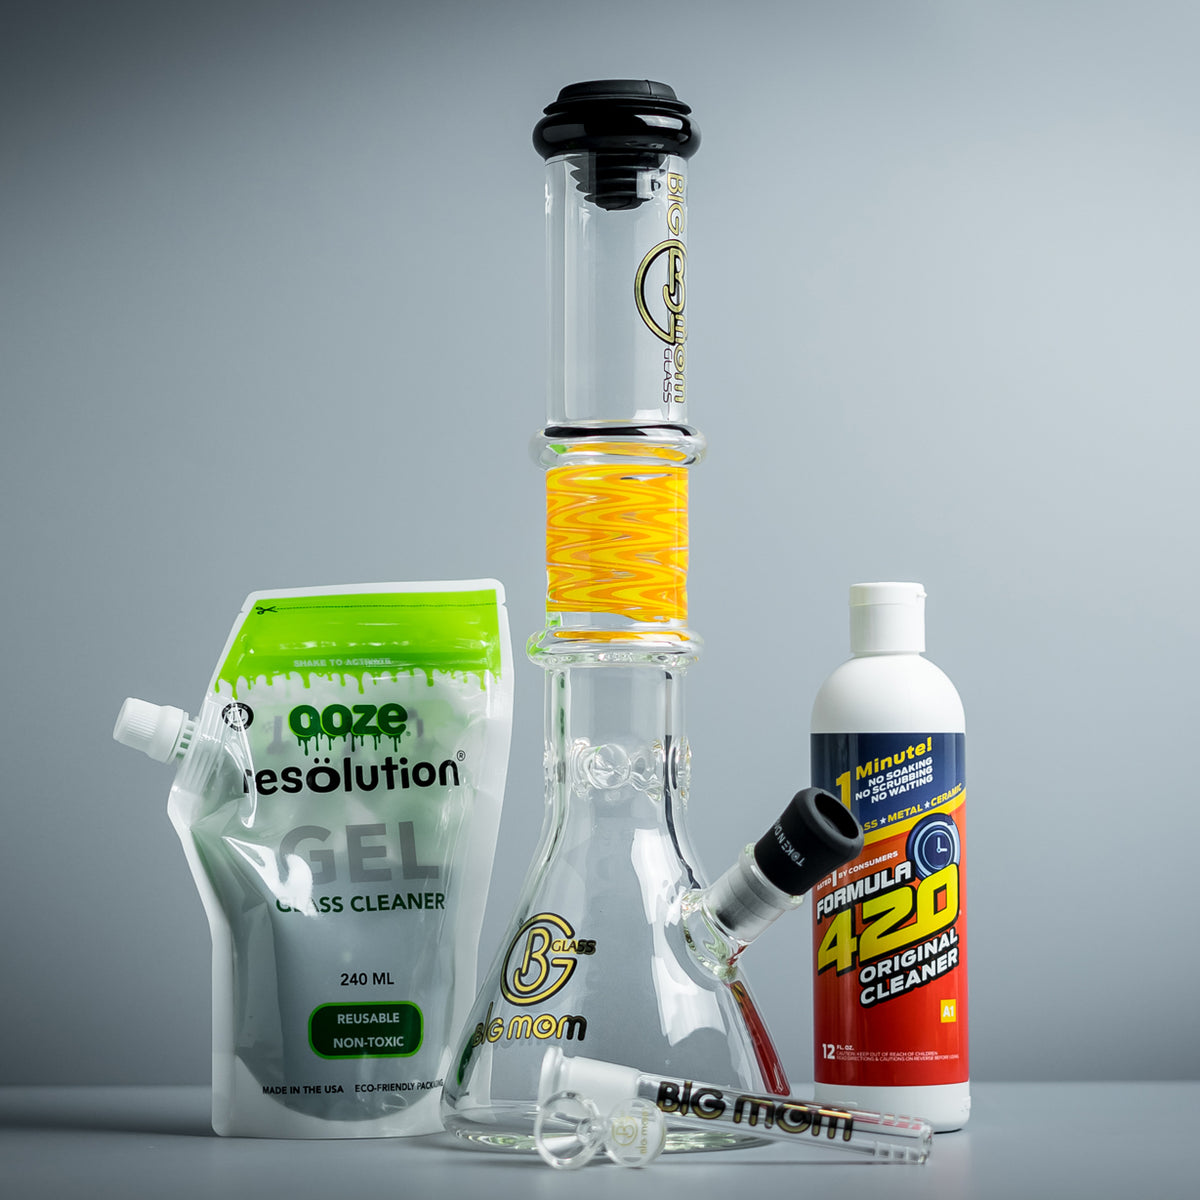 6 Simple Tips: How to Clean a Bong the Right Way